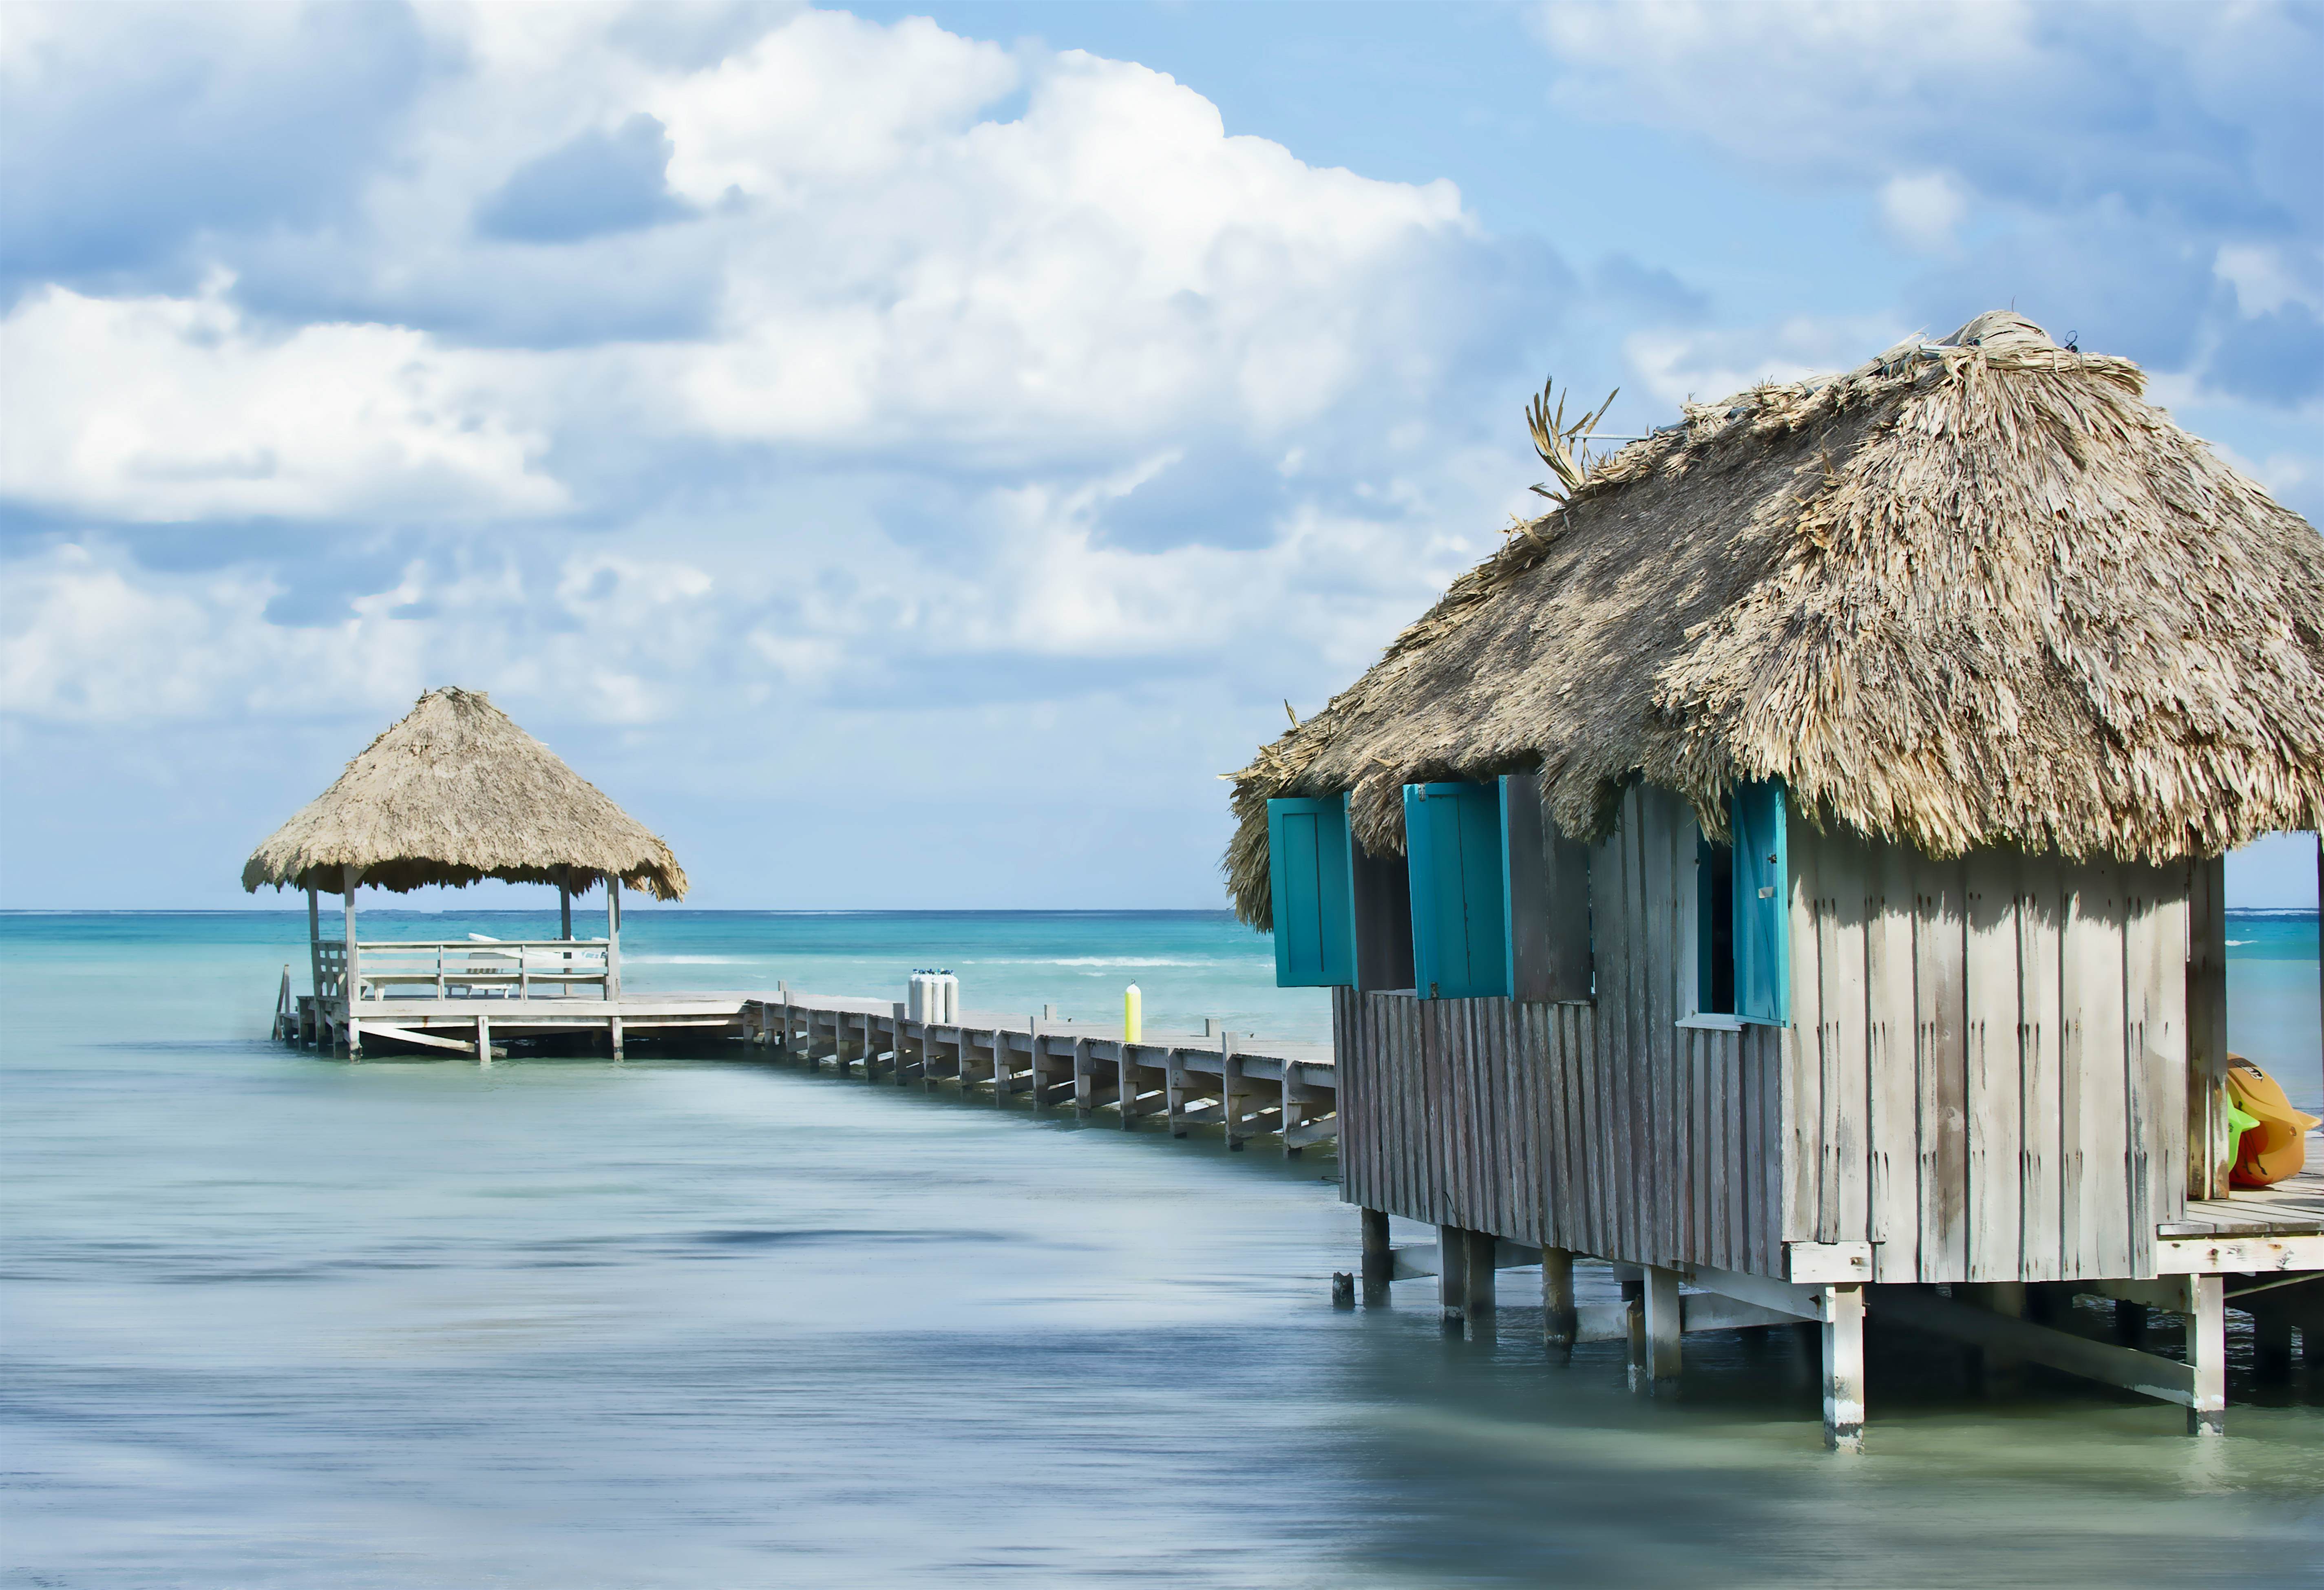 ambergris caye in belize